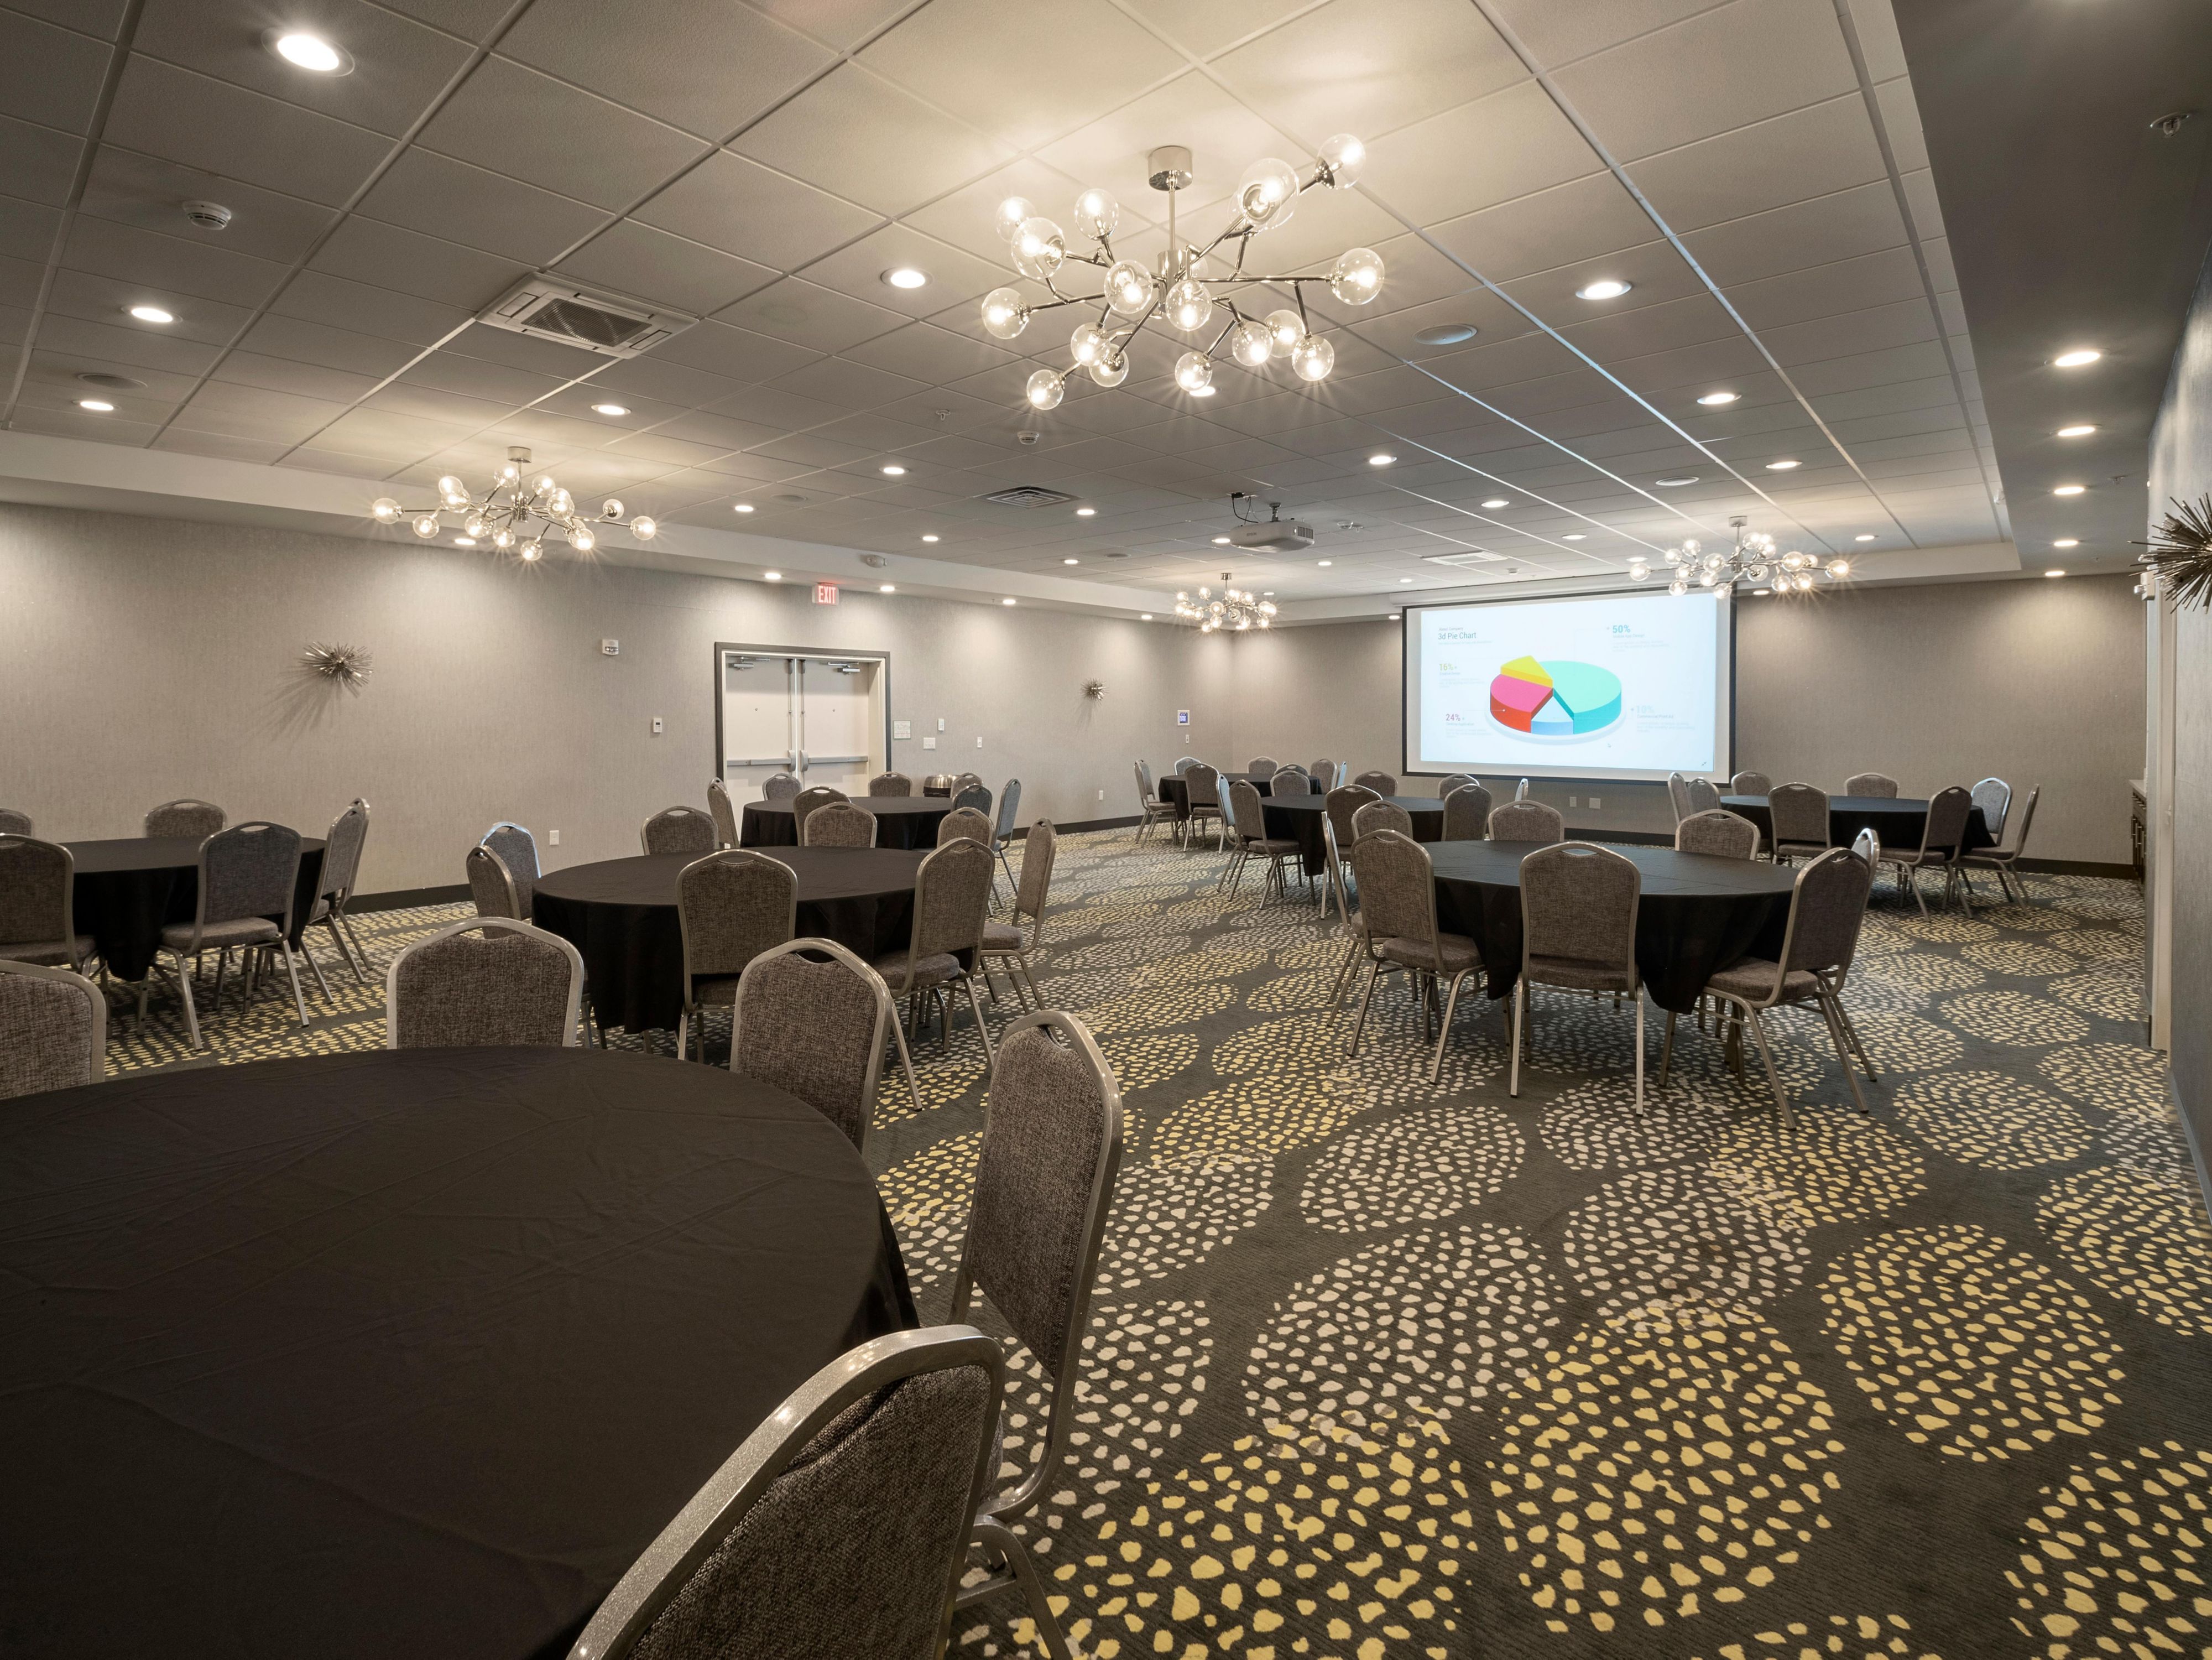 Need a space for your next conference or meeting?  Look no further than the Holiday Inn and Suites Decatur/ Forsyth!  We offer full service meeting packages for groups of 2-200.  Contact our sales department to discuss your event.